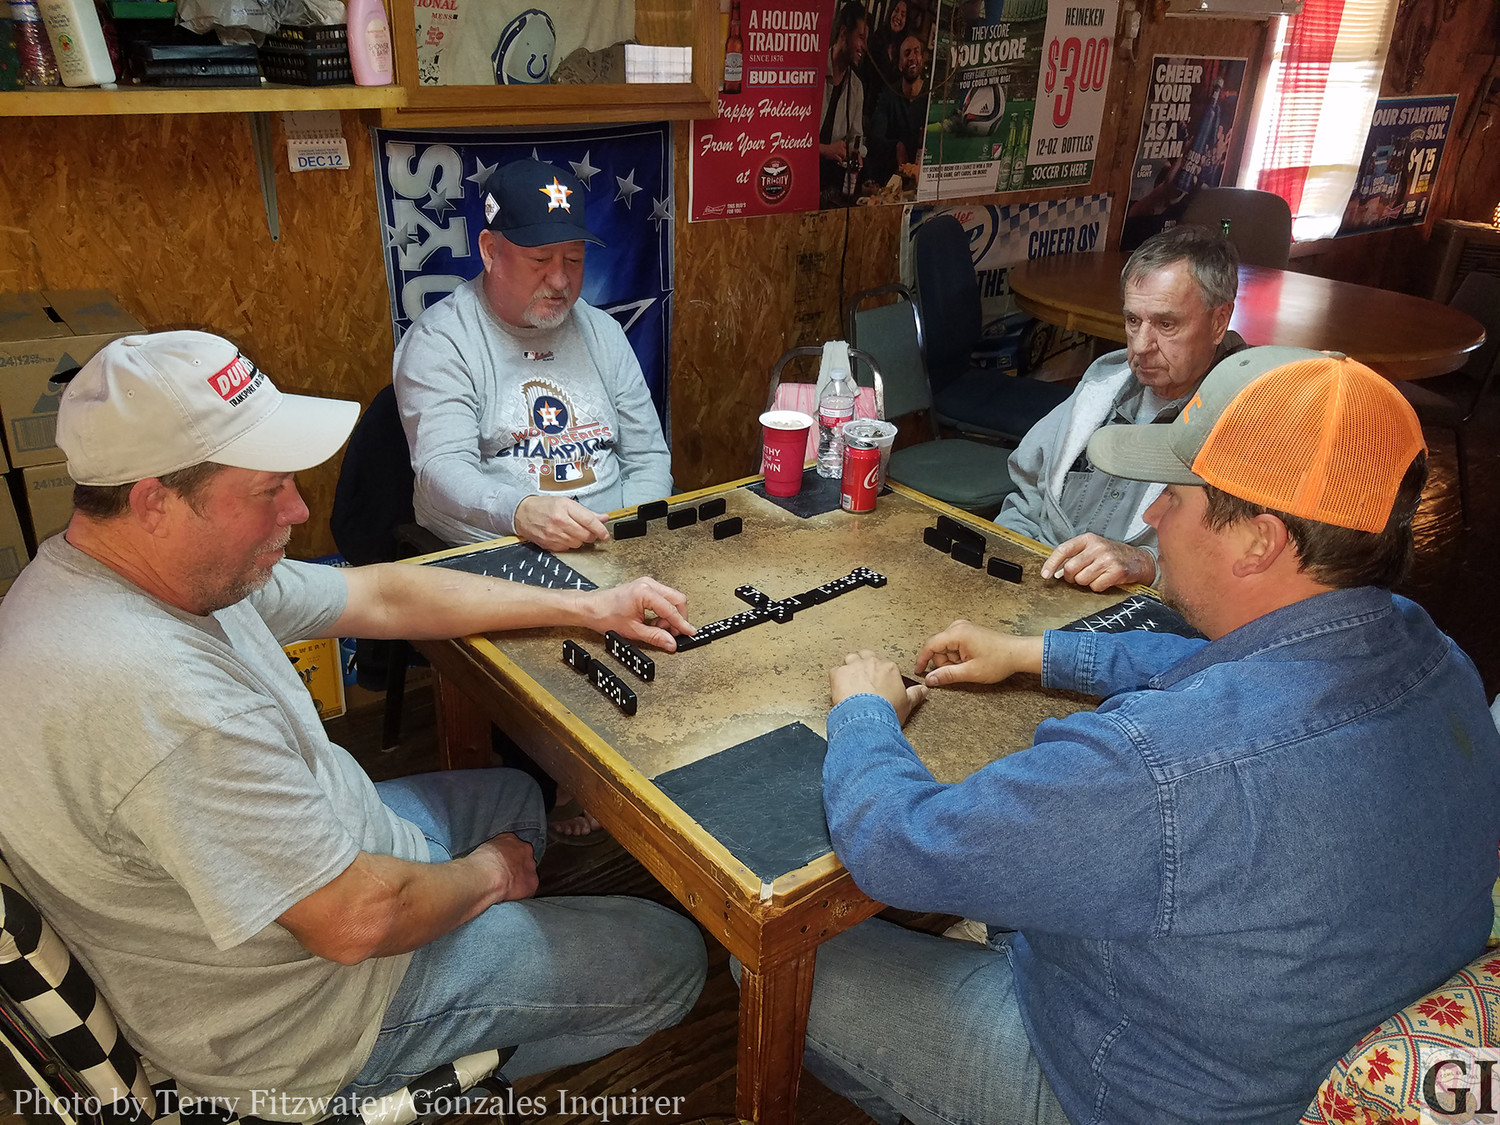 Patrons of Boomer’s Sports Bar come over for food, drinks, hospitality, and even some dominoes.